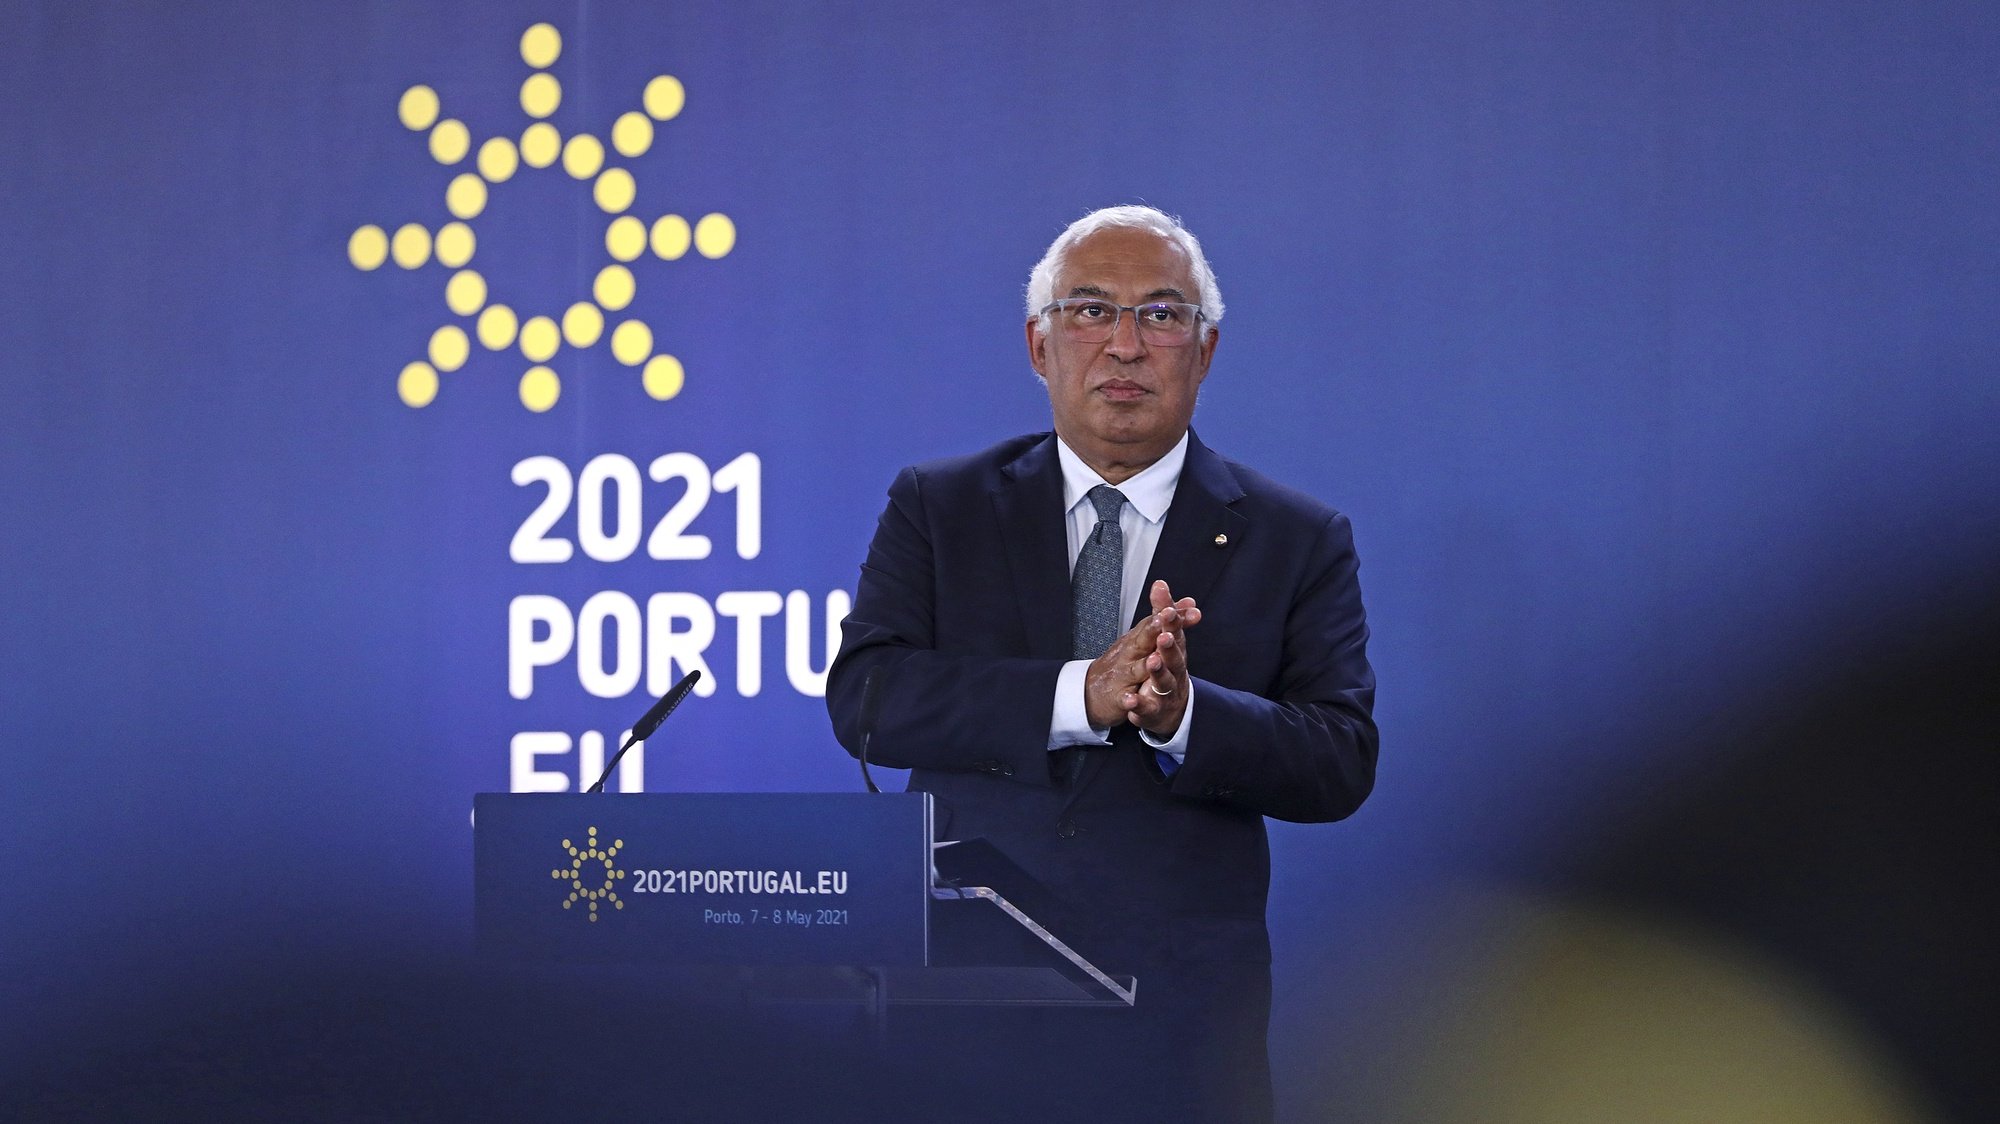 epa09185632 Portuguese Prime Minister Antonio Costa attends the final press conference at the end of the informal meeting during the 2nd day of the EU Social Summit at the Palacio de Cristal in Porto, Portugal, 08 May 2021. The European Union leaders met for a summit in Portugal, sending a signal they see the threat from COVID-19 on their continent as waning amid a quickening vaccine rollout. Their talks hope to repair some of the damage the coronavirus has caused in the bloc, in such areas as welfare and employment.  EPA/ANTONIO PEDRO SANTOS/POOL